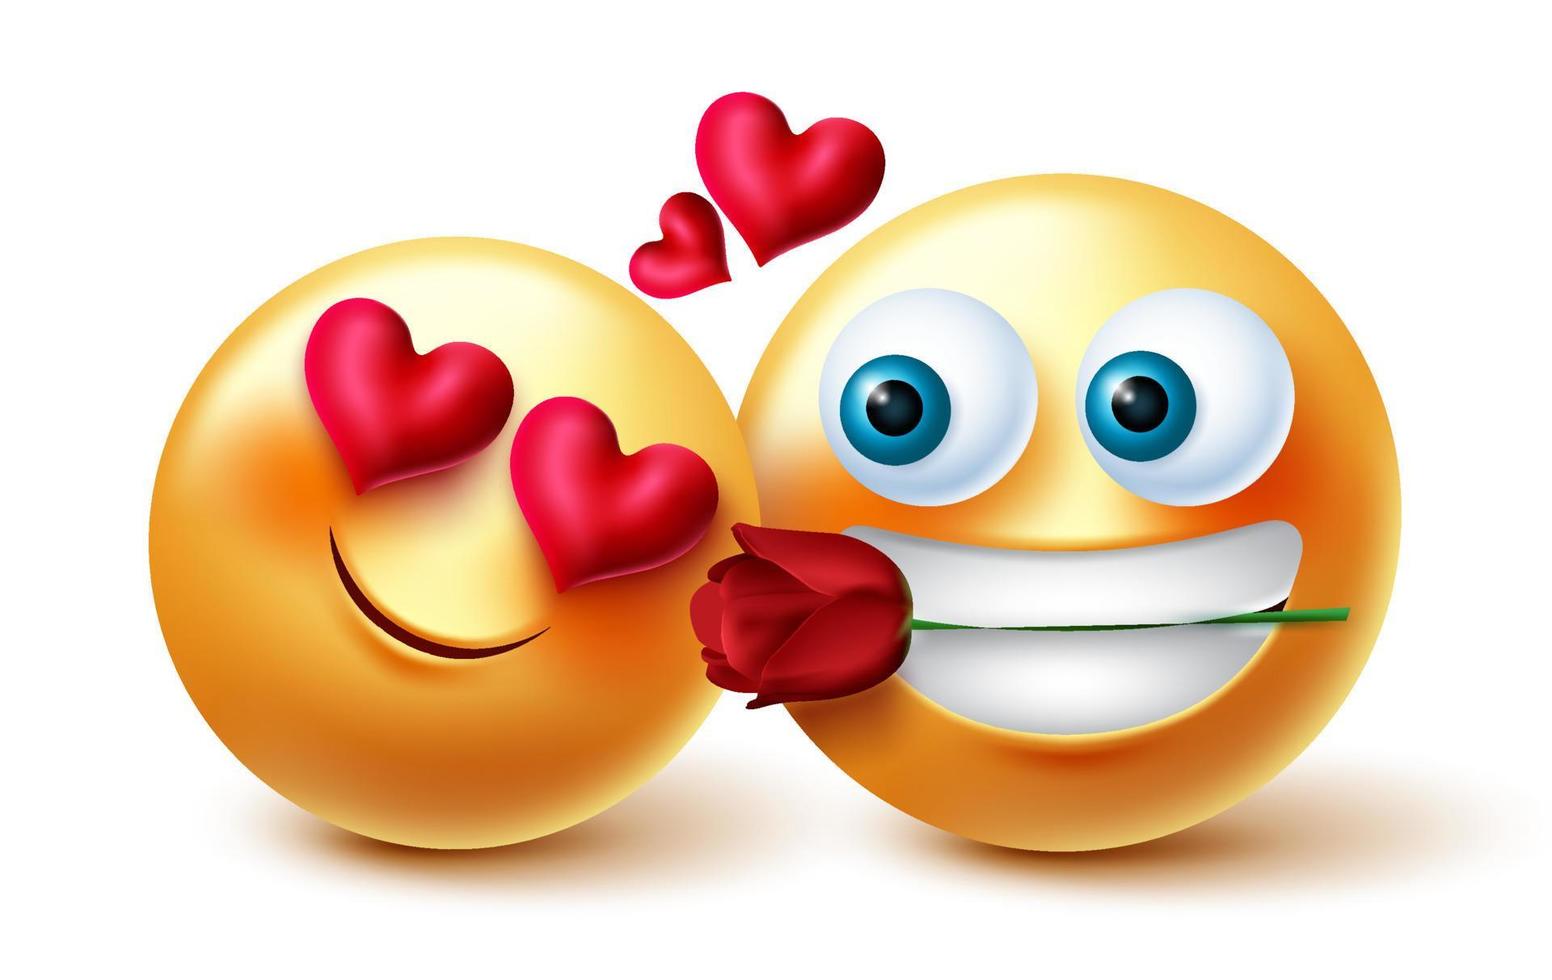 Emoji couple valentine vector design. Emojis 3d lovers concept with rose and hearts elements for valentines anniversary celebration emoticon characters. Vector illustration.